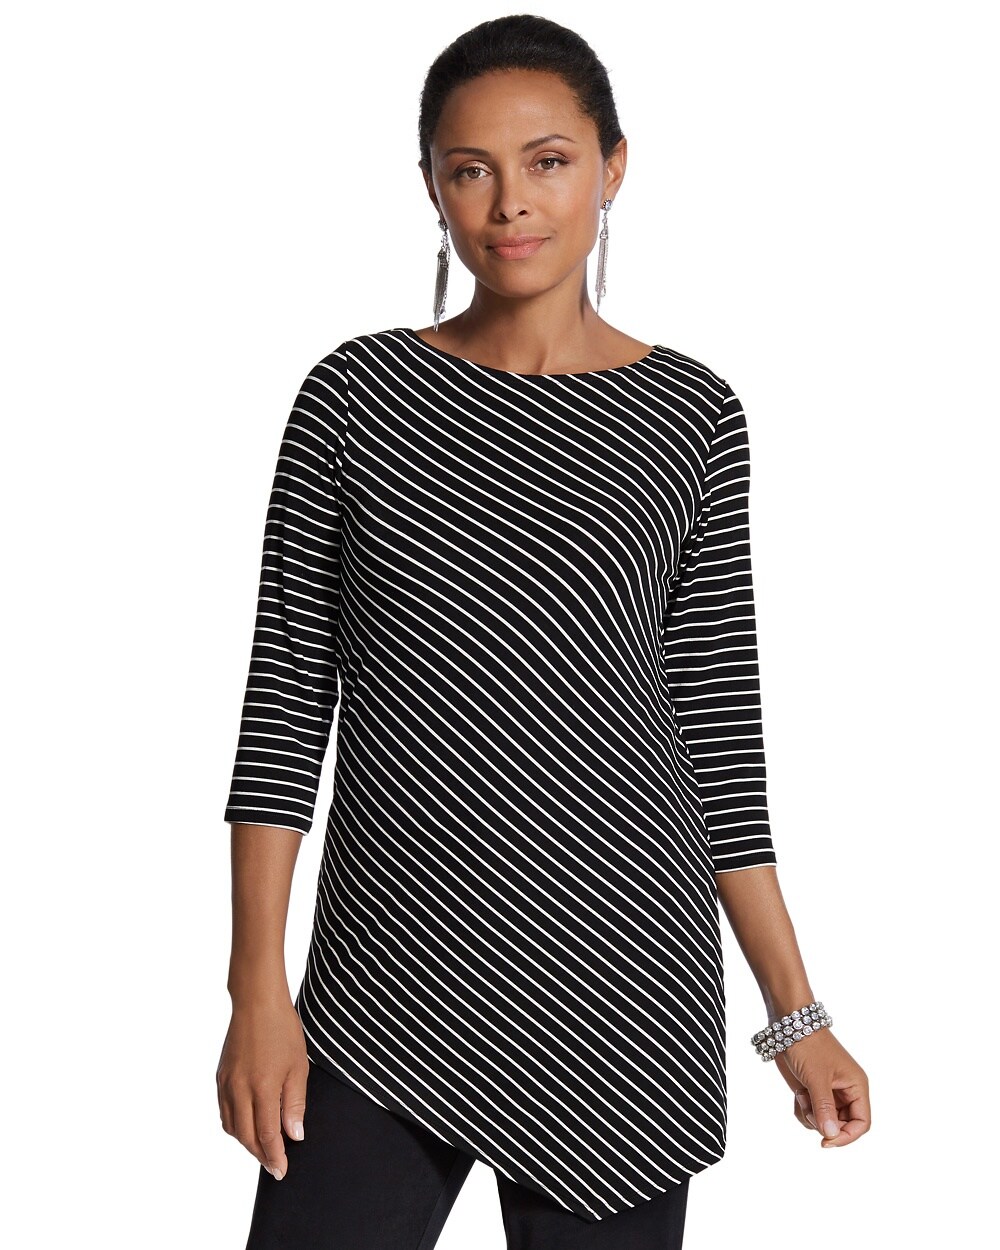 Travelers Classic Black-and-White Striped Top